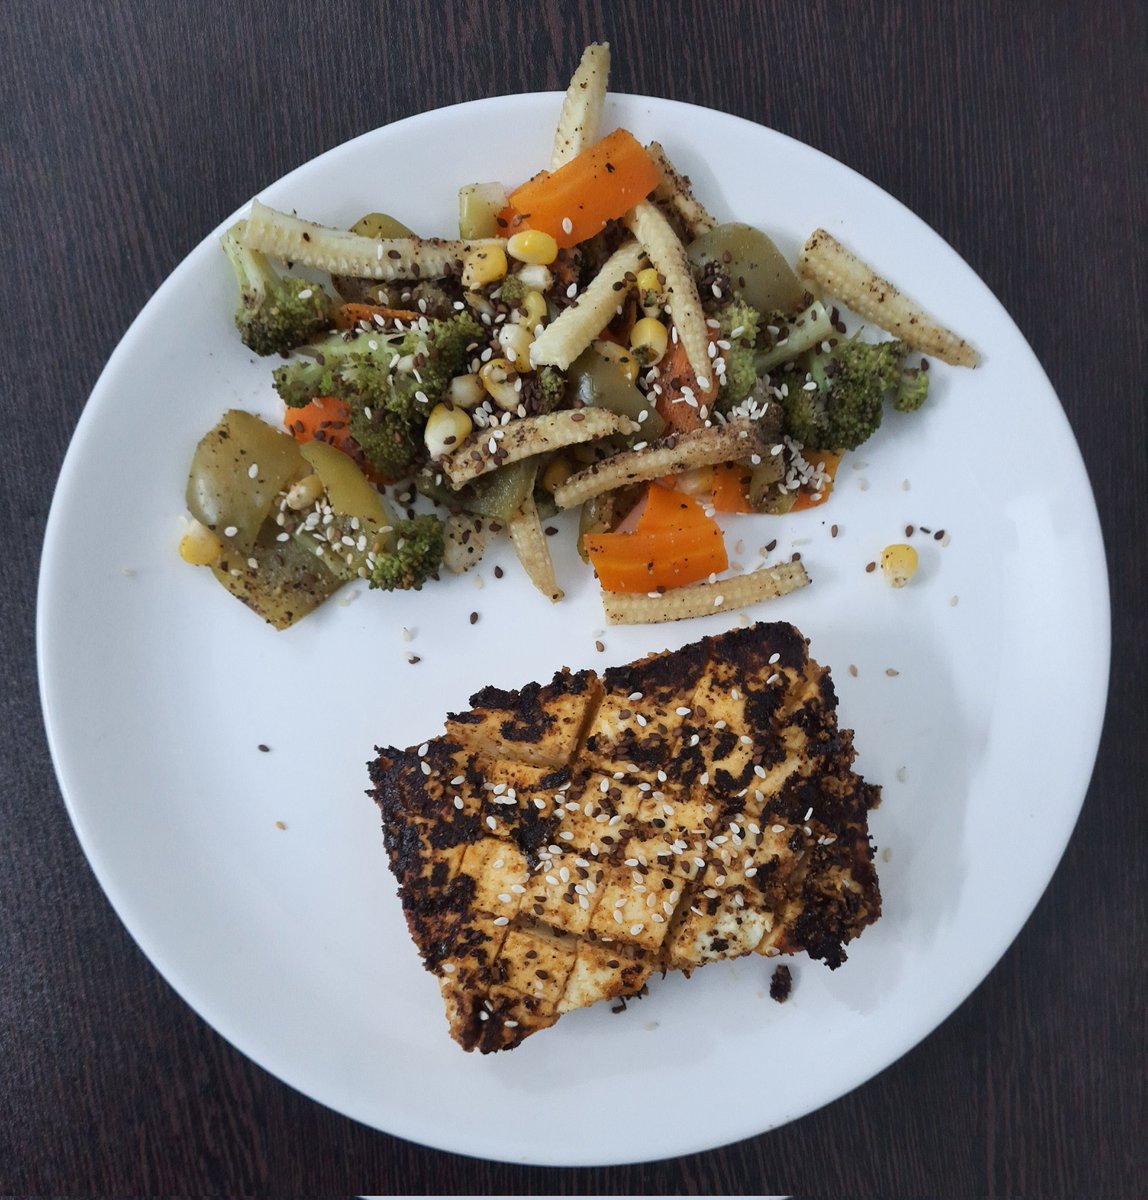 Paneer Steak With Veggies For a Meal 🍽  
#Diet #NutrientRich #HealthyChoices #FoodBlogger #Fitness #Dinner #Protein #BeingHealthy #Vegetarian